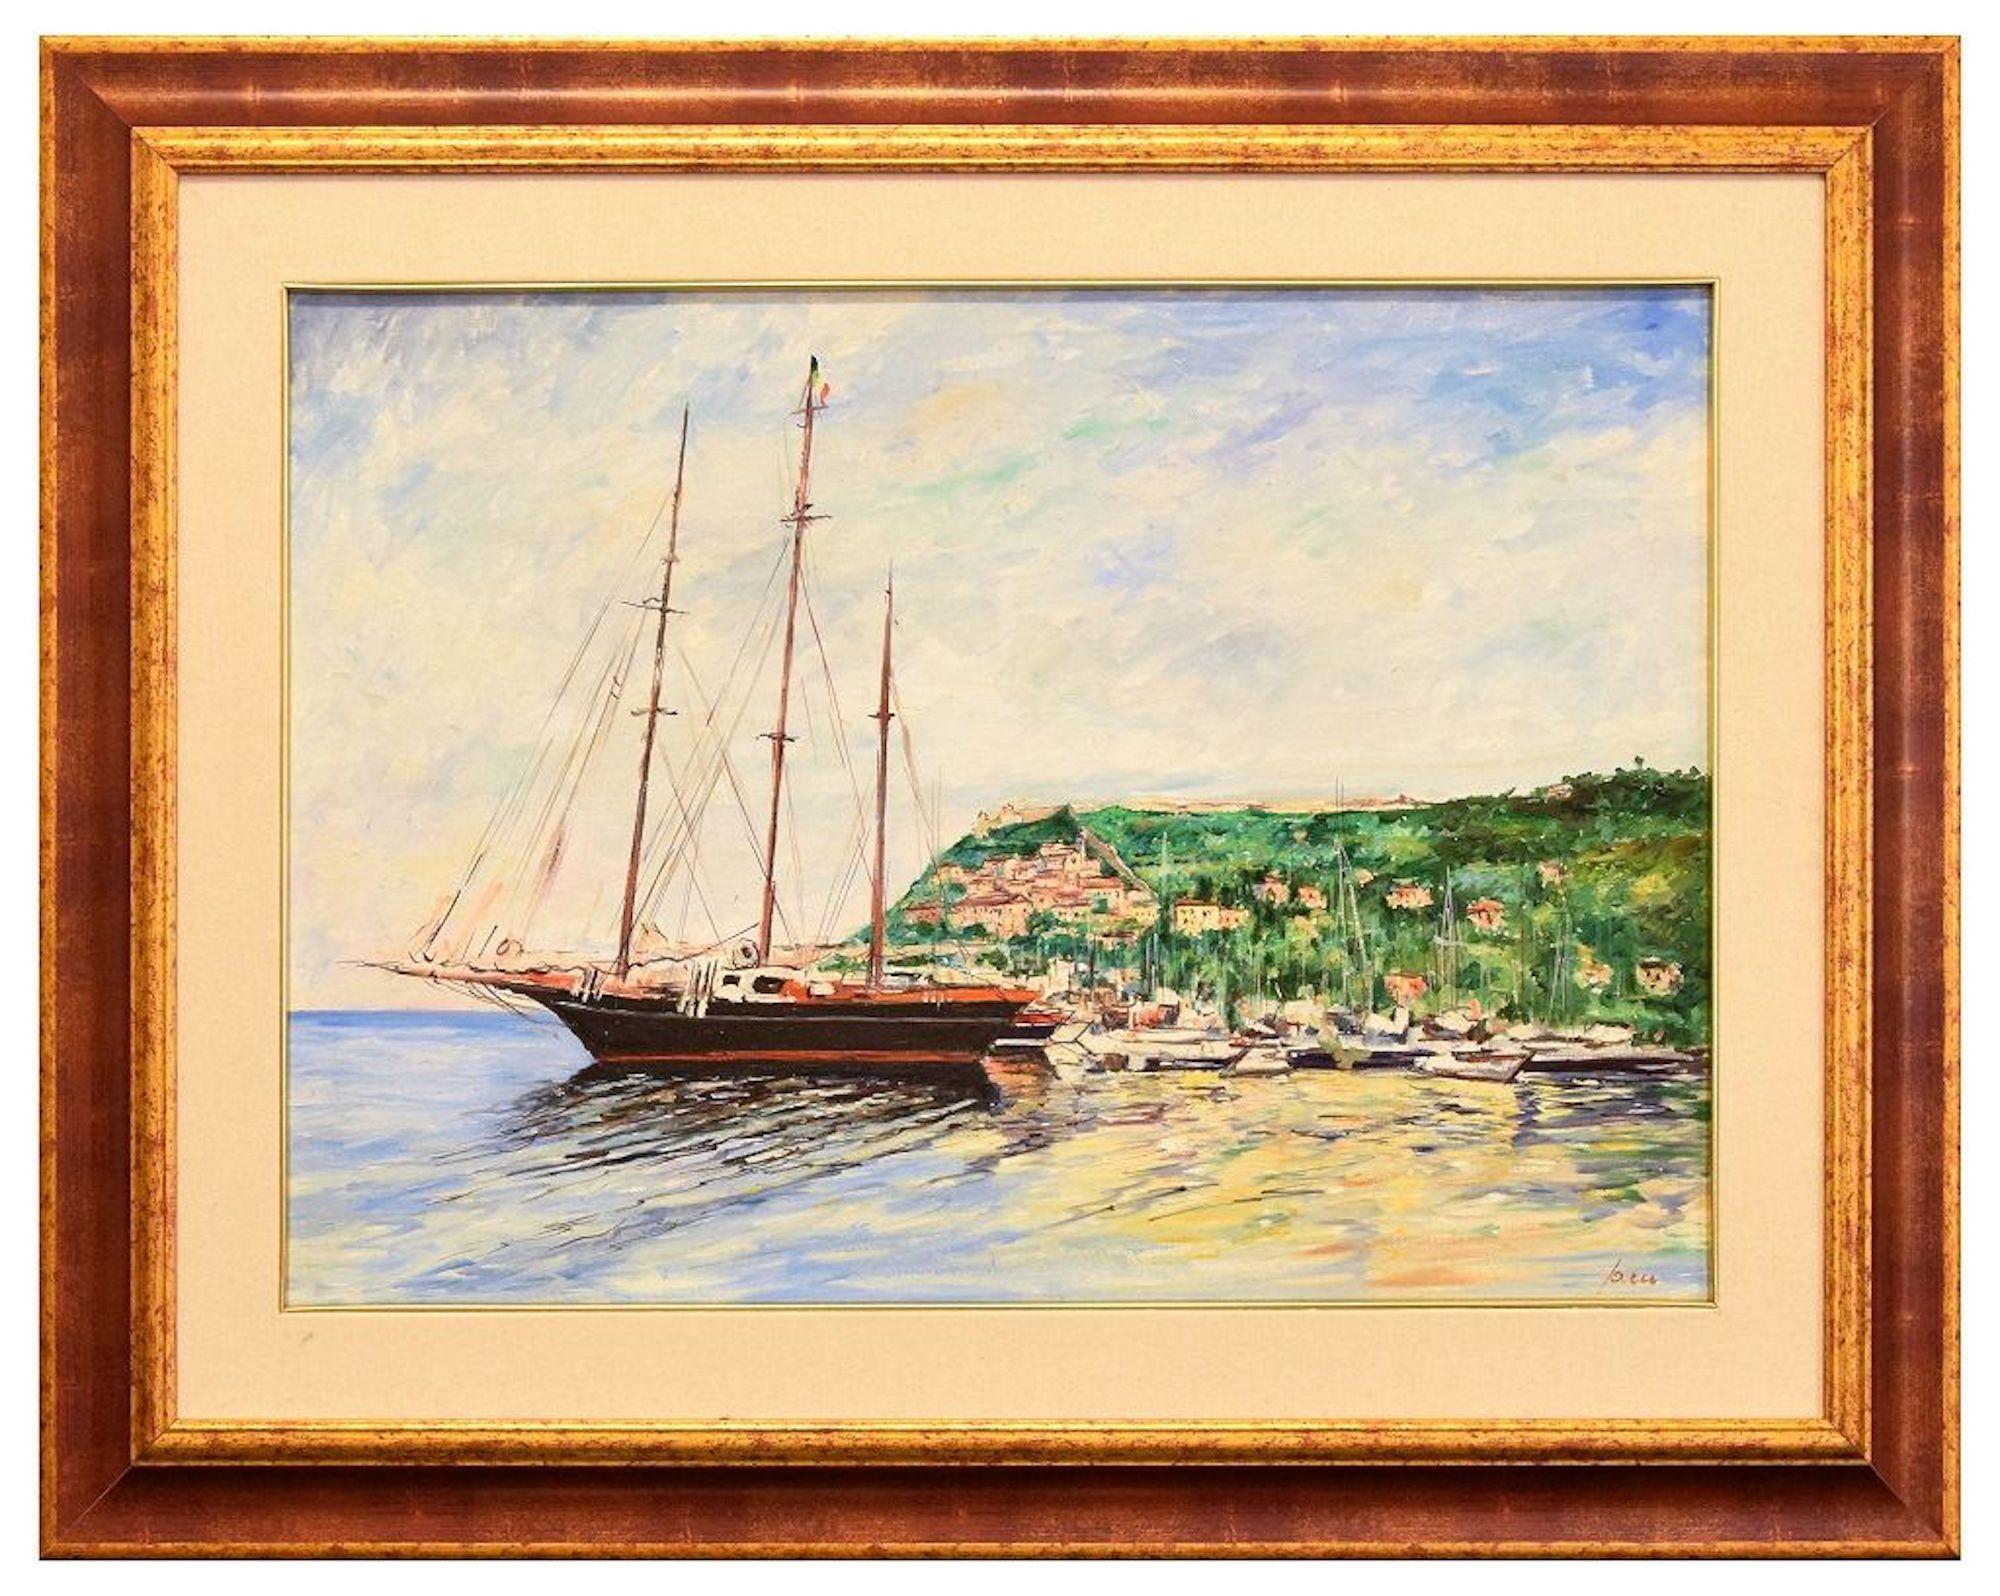 Elba is a very colorful oil painting on canvas realized by the Italian contemporary artist Luciano Sacco in the 1970s.

Including a frame (73 x 93cm). Hand-signed by the artist on the lower right. Titled on the back.

Very good conditions.

This